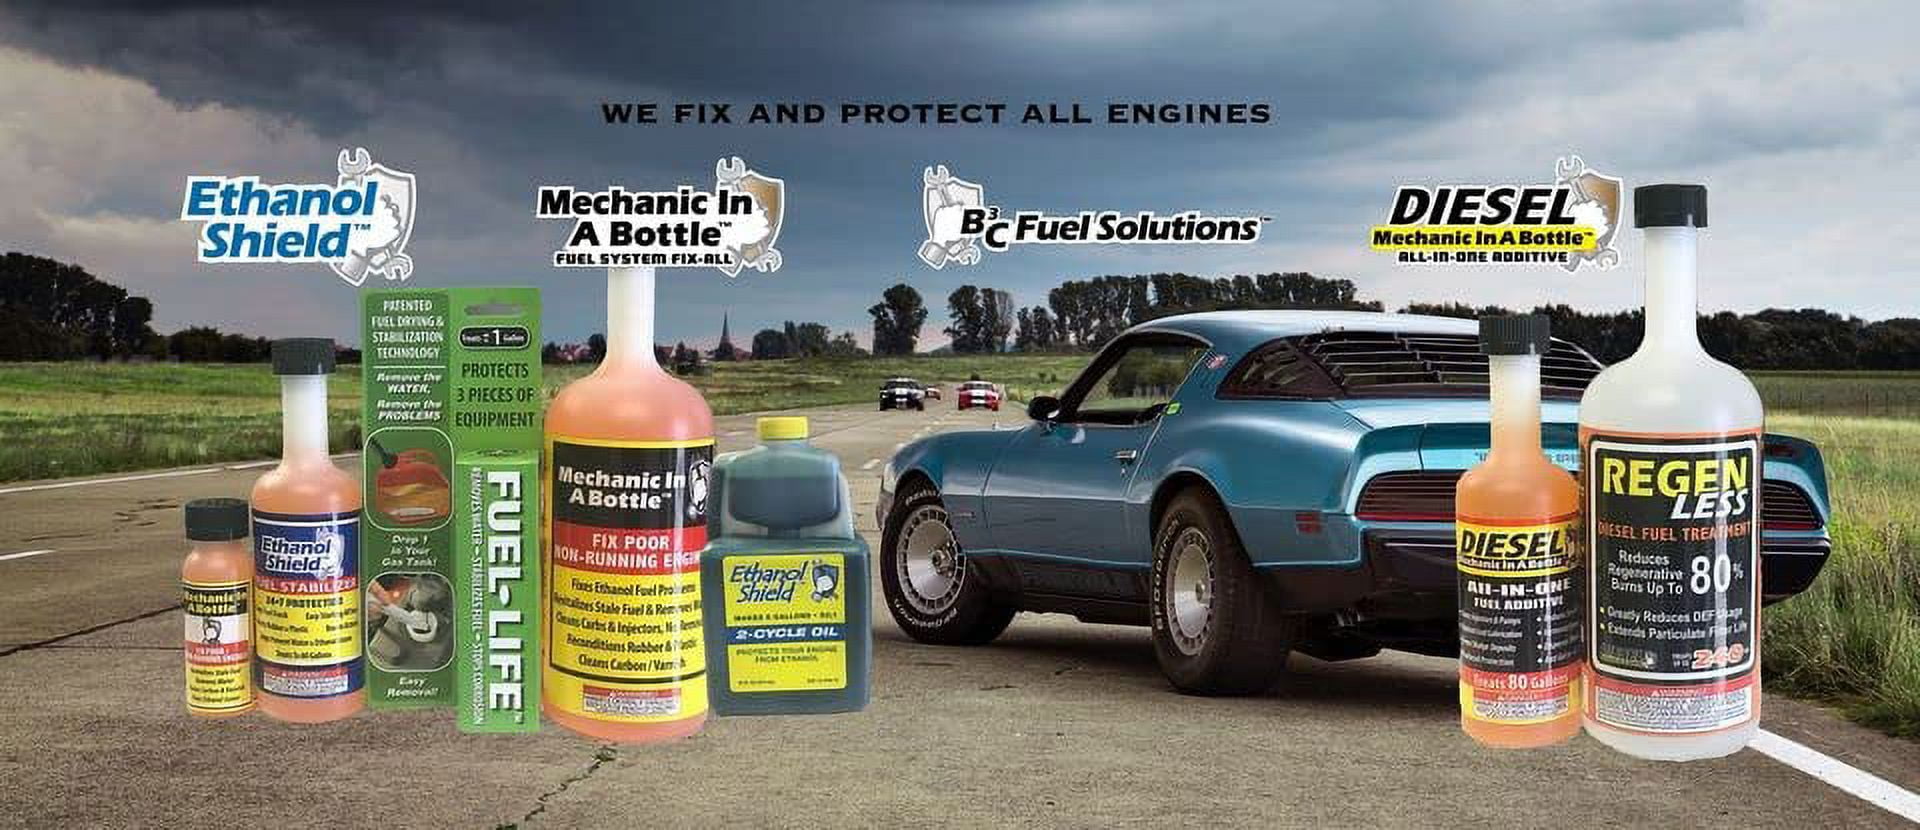 B3C FUEL SOLUTIONS INC Mechanic In A Bottle 2-In-1 Gasoline Quality Test  0.3 oz.